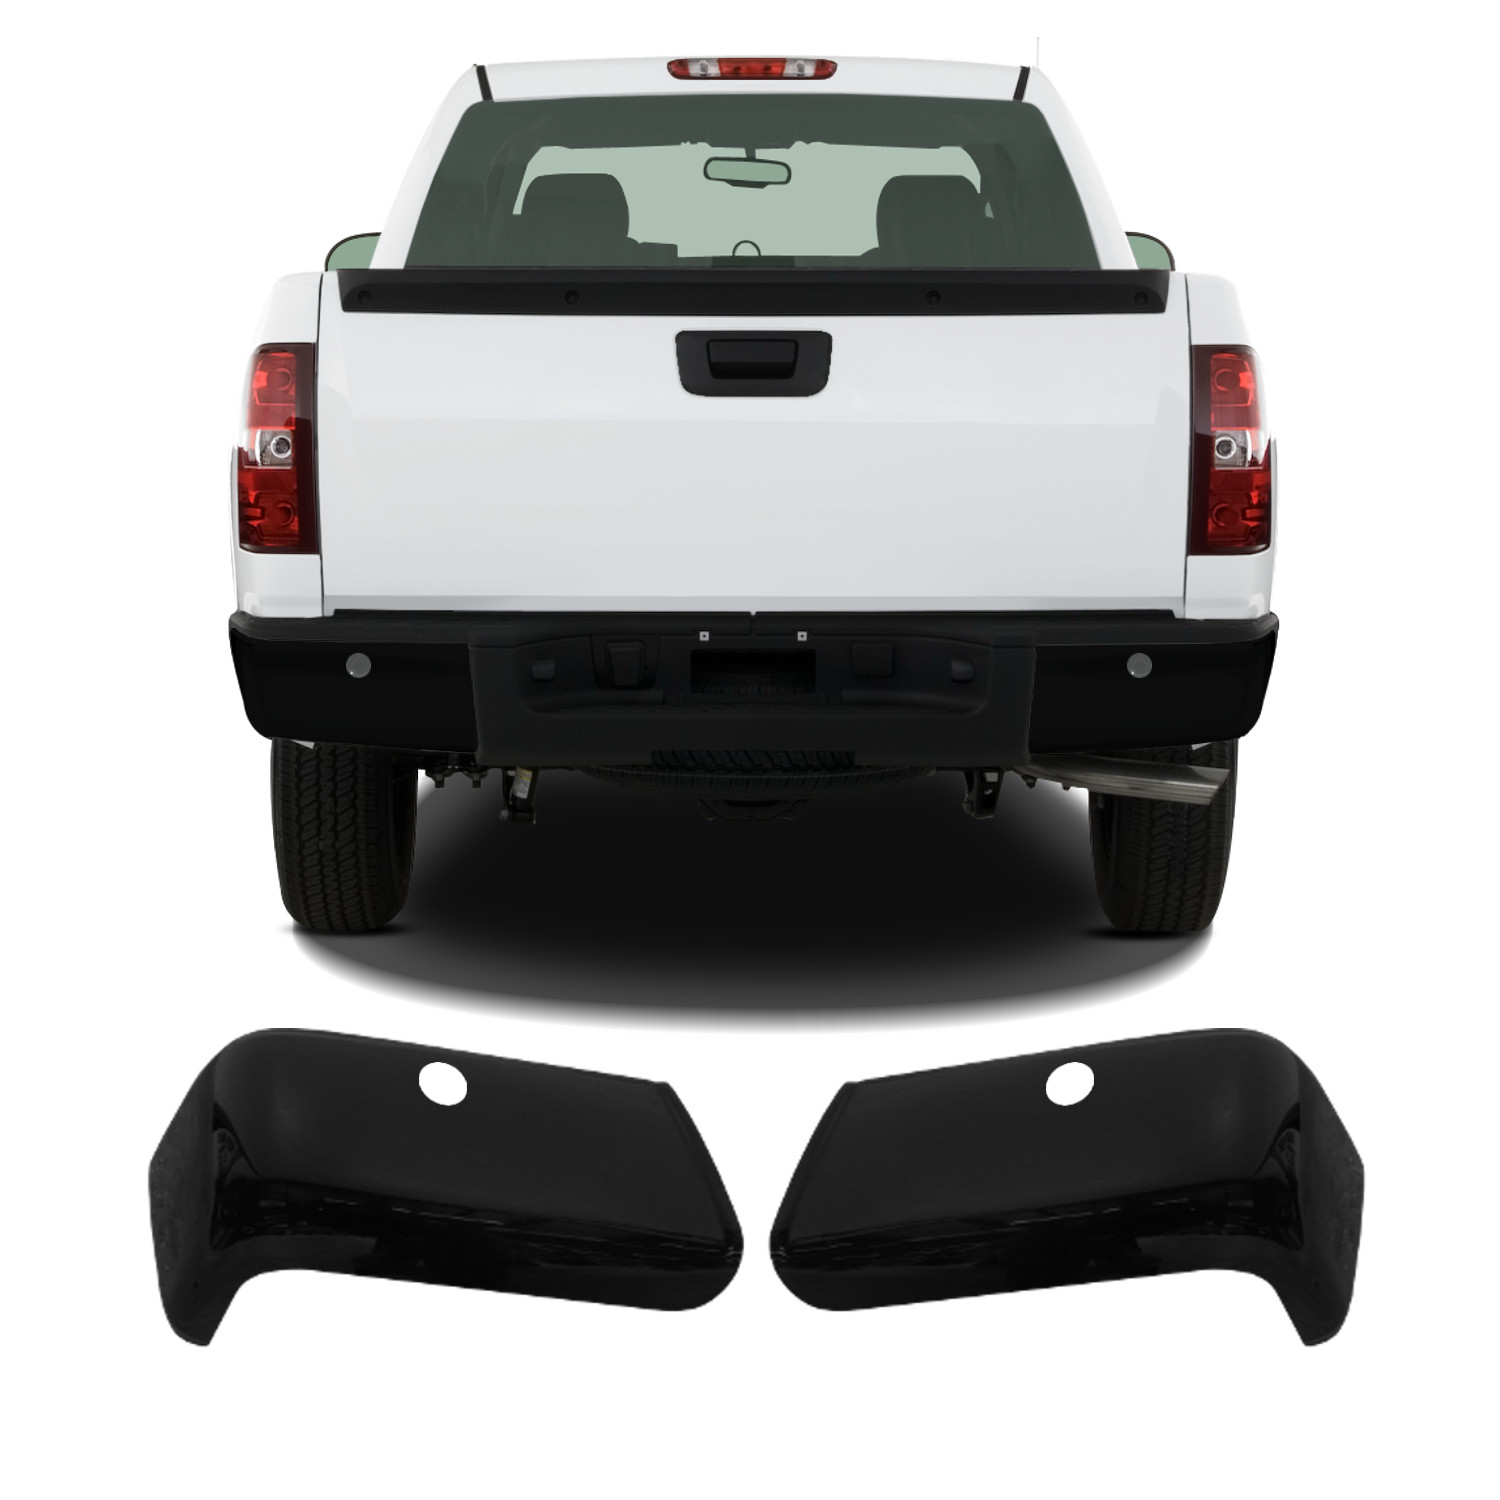 OCPTY Rear Bumper Fit for 2007-2013 for Chevrolet Silverado 1500 for GMC Sierra 1500 With License Plate Lights Chrome 